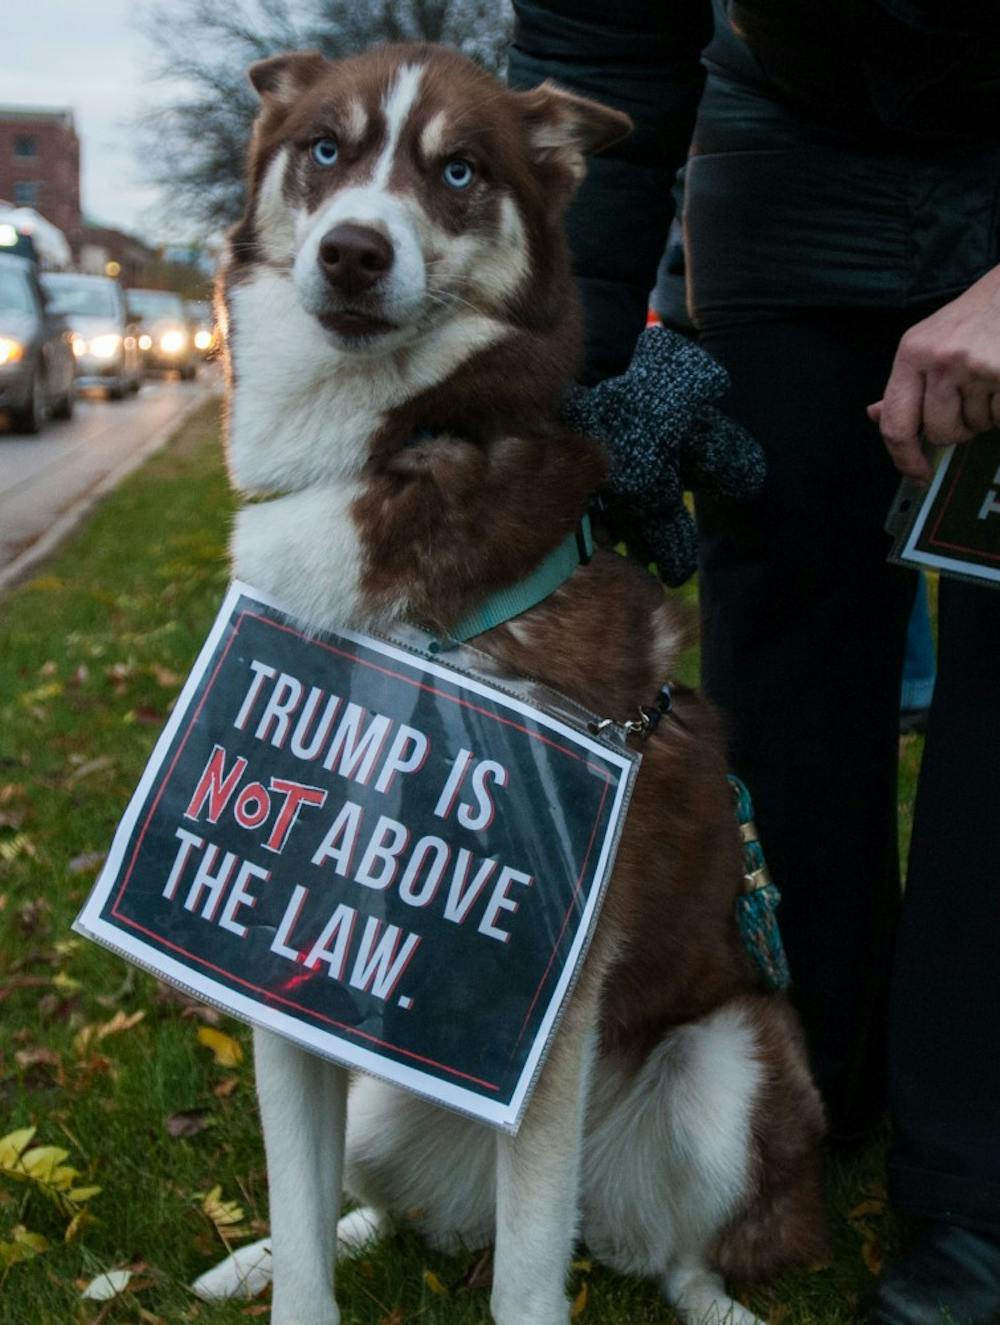 Zehnder, 2, sports a protest sign during a "Trump is Not Above the Law" protest at Grand River and Abbott in East Lansing on Nov. 8, 2018.